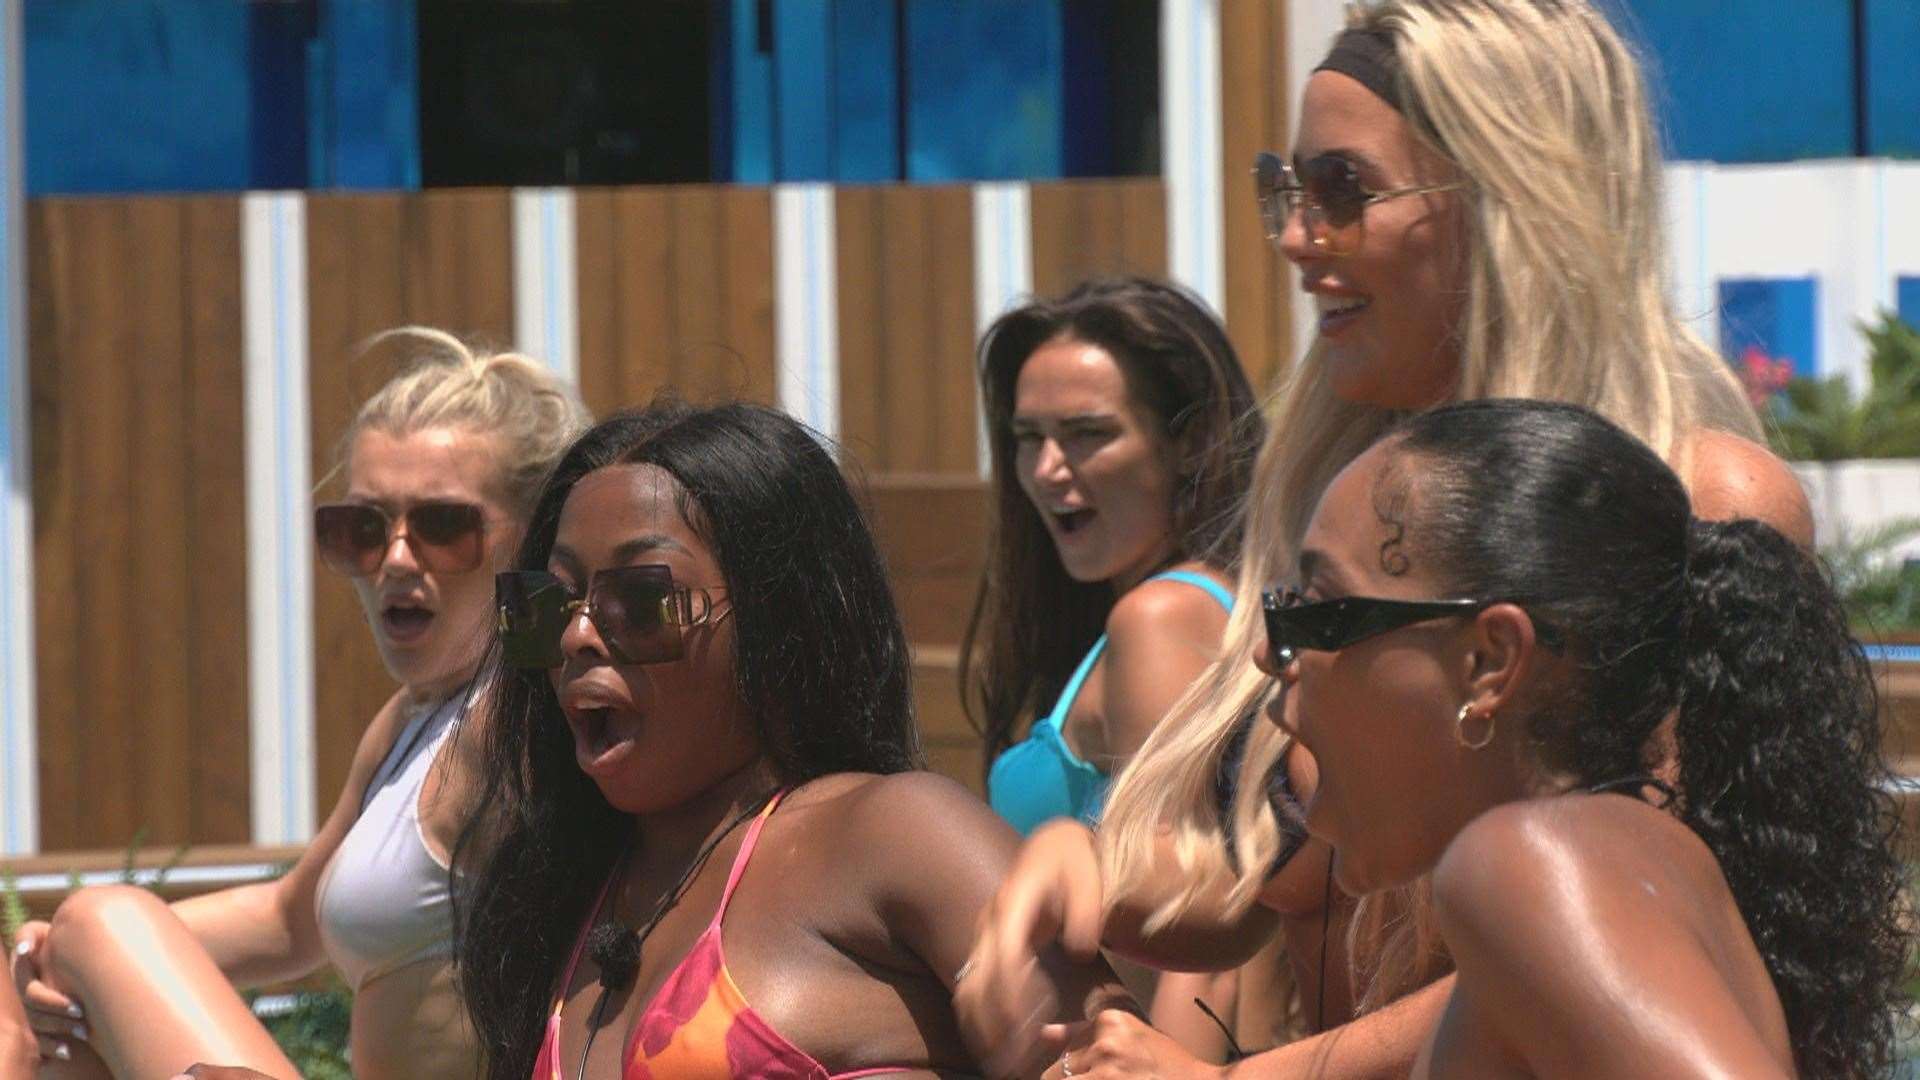 Jess Harding, above right, with some of the other female islanders. Picture: ITV